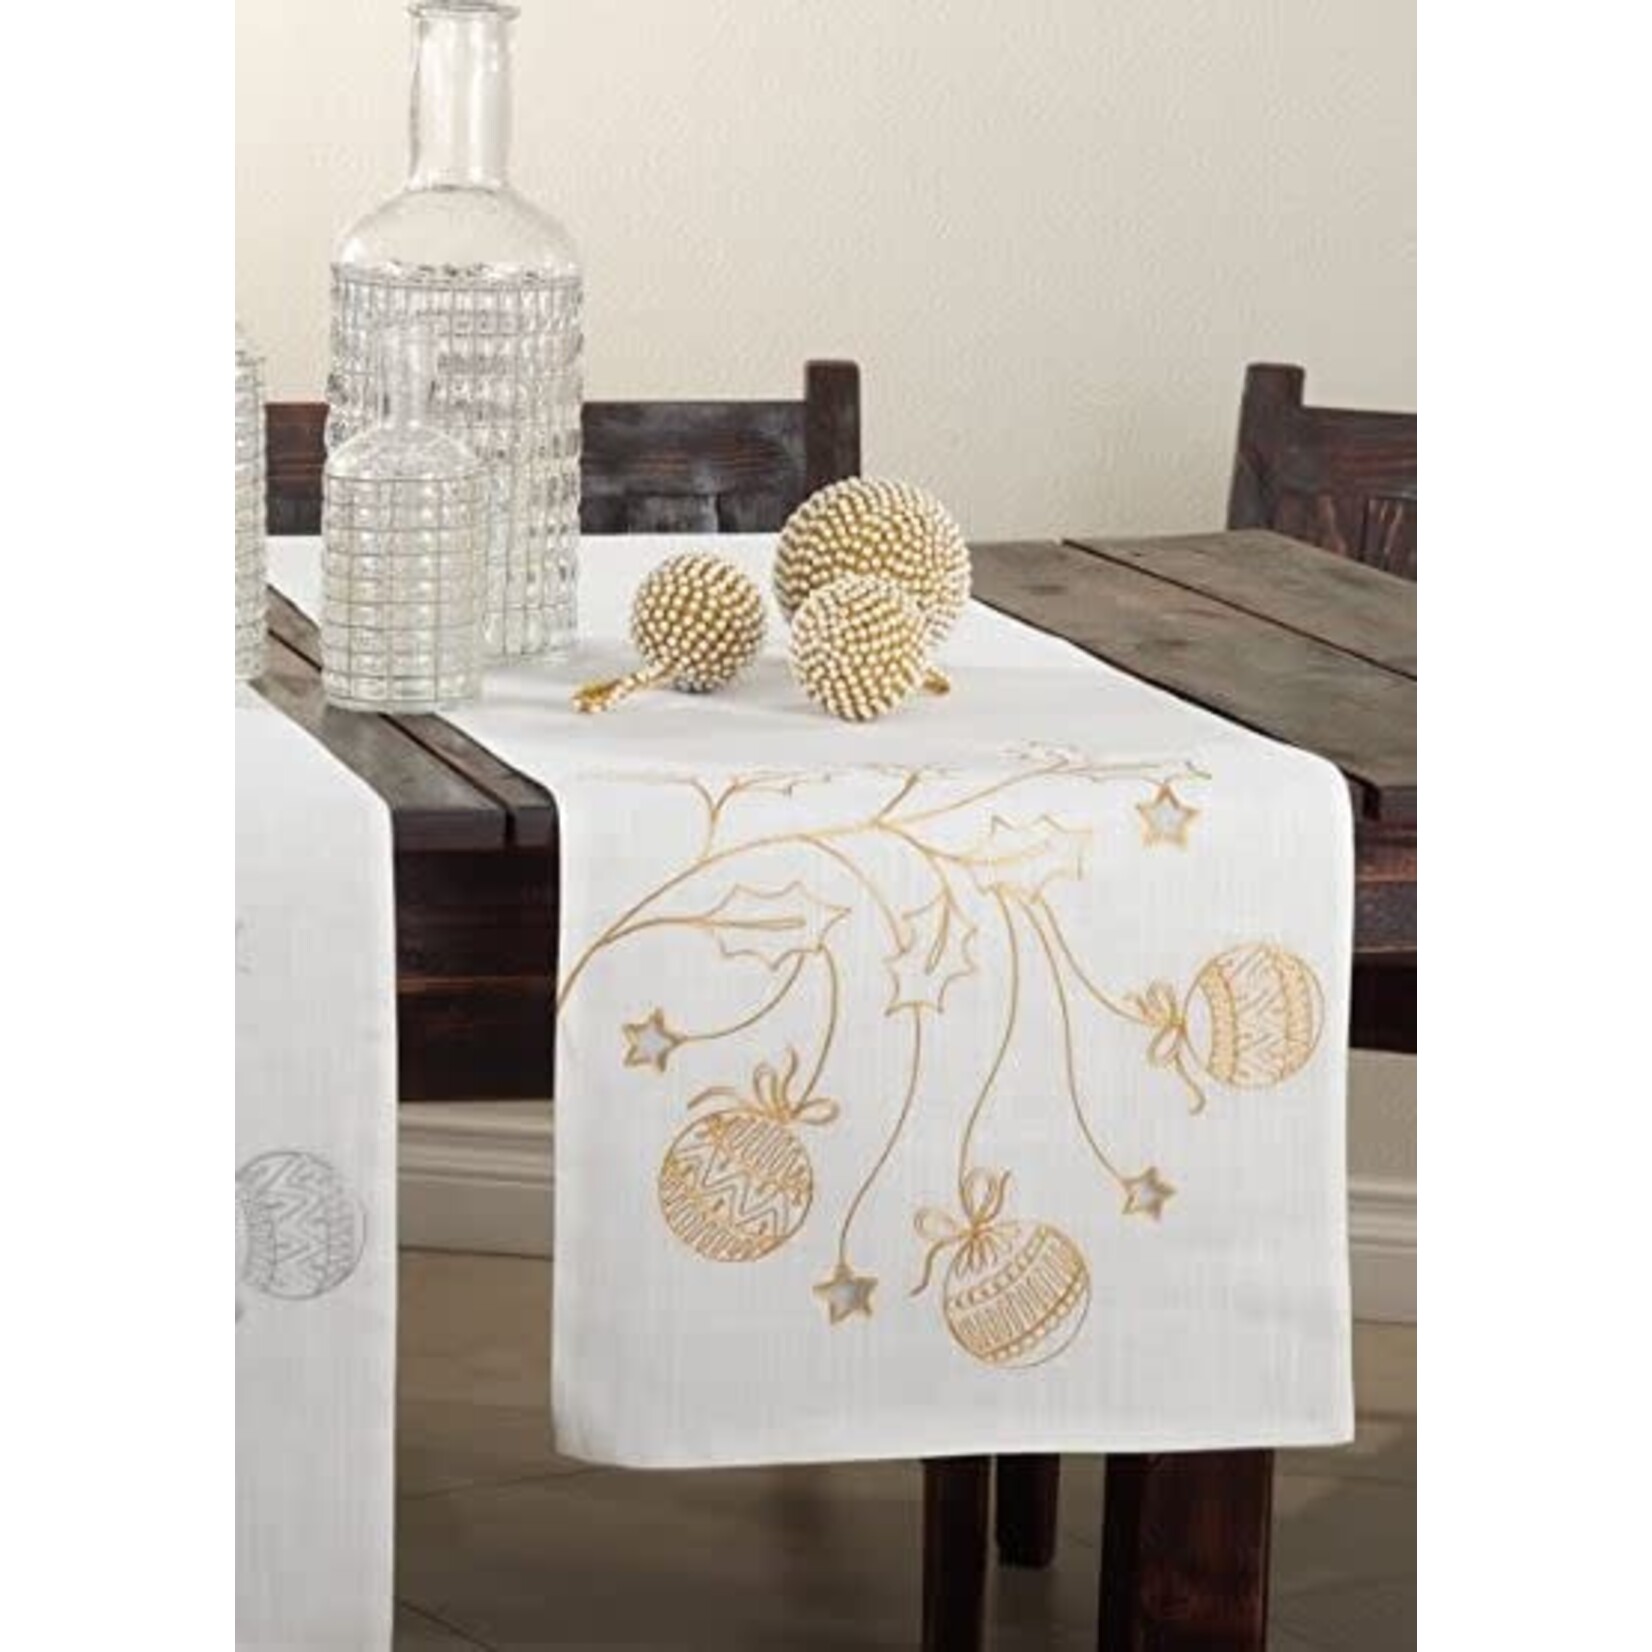 Saro Trading Company Boules de Noel Tablecloth Runner with Gold Ornaments